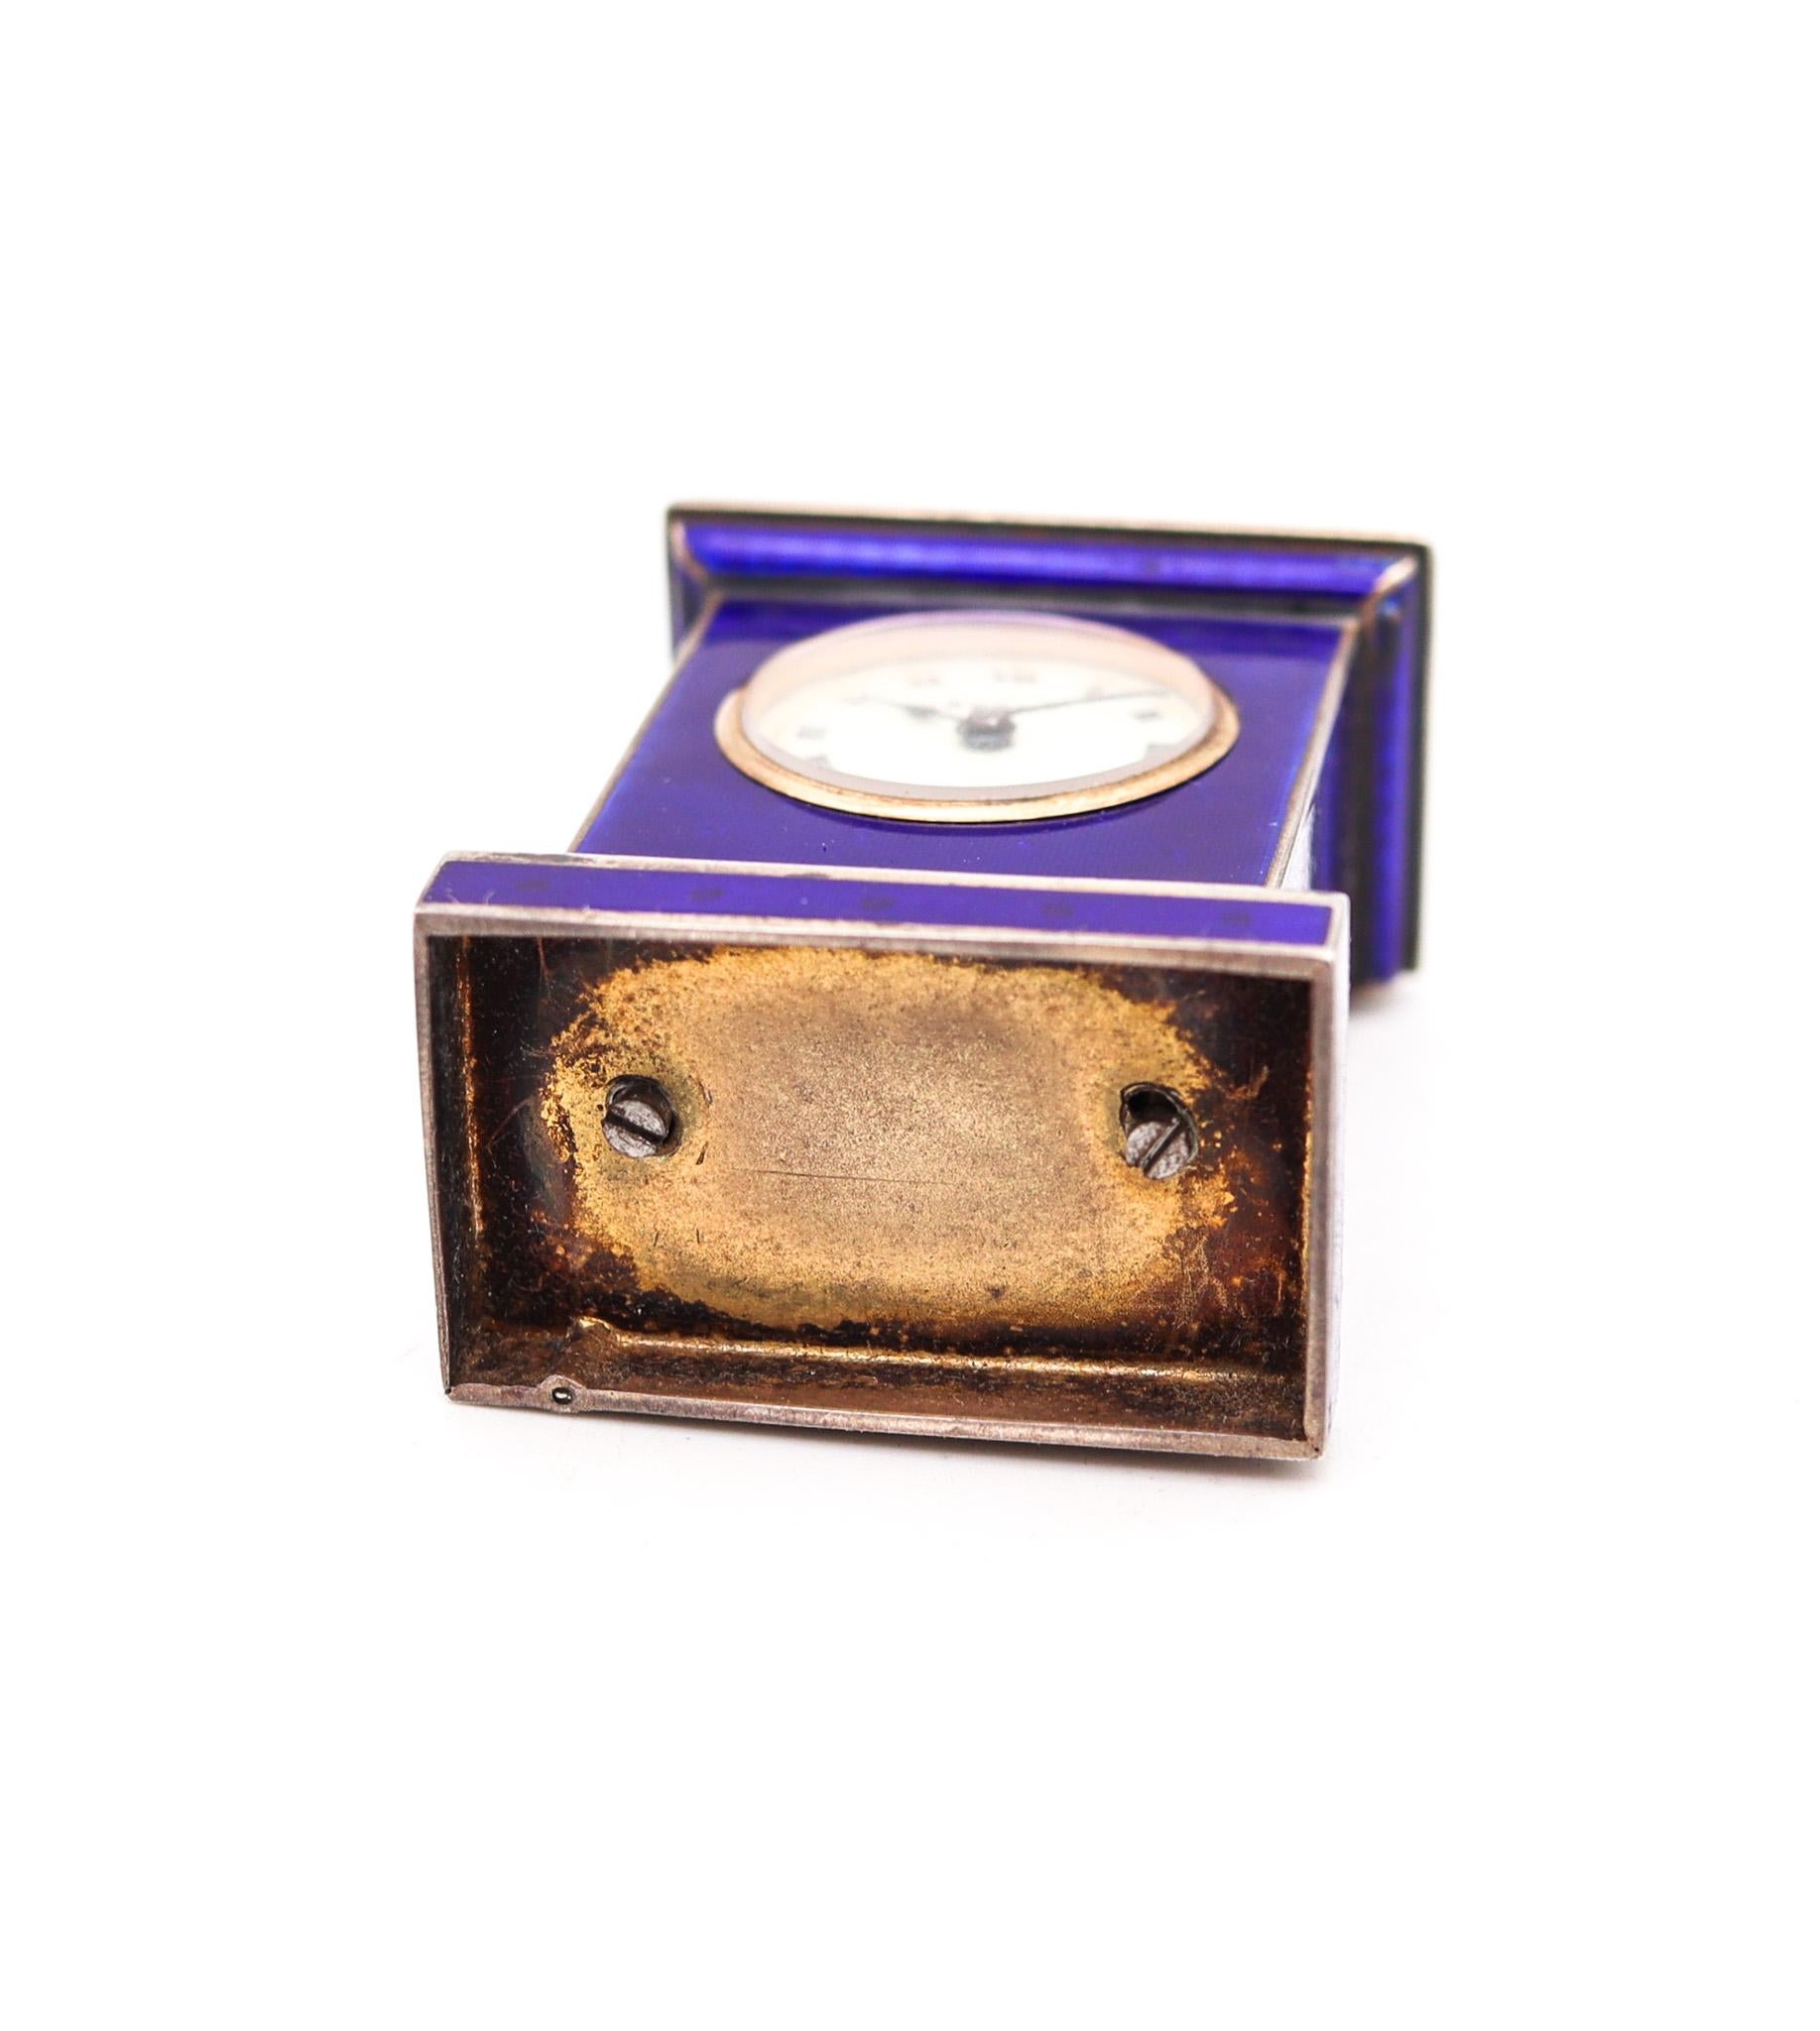 Early 20th Century Valme 1920 Miniature Travel Clock With Guilloché Enamel In Sterling With Box For Sale